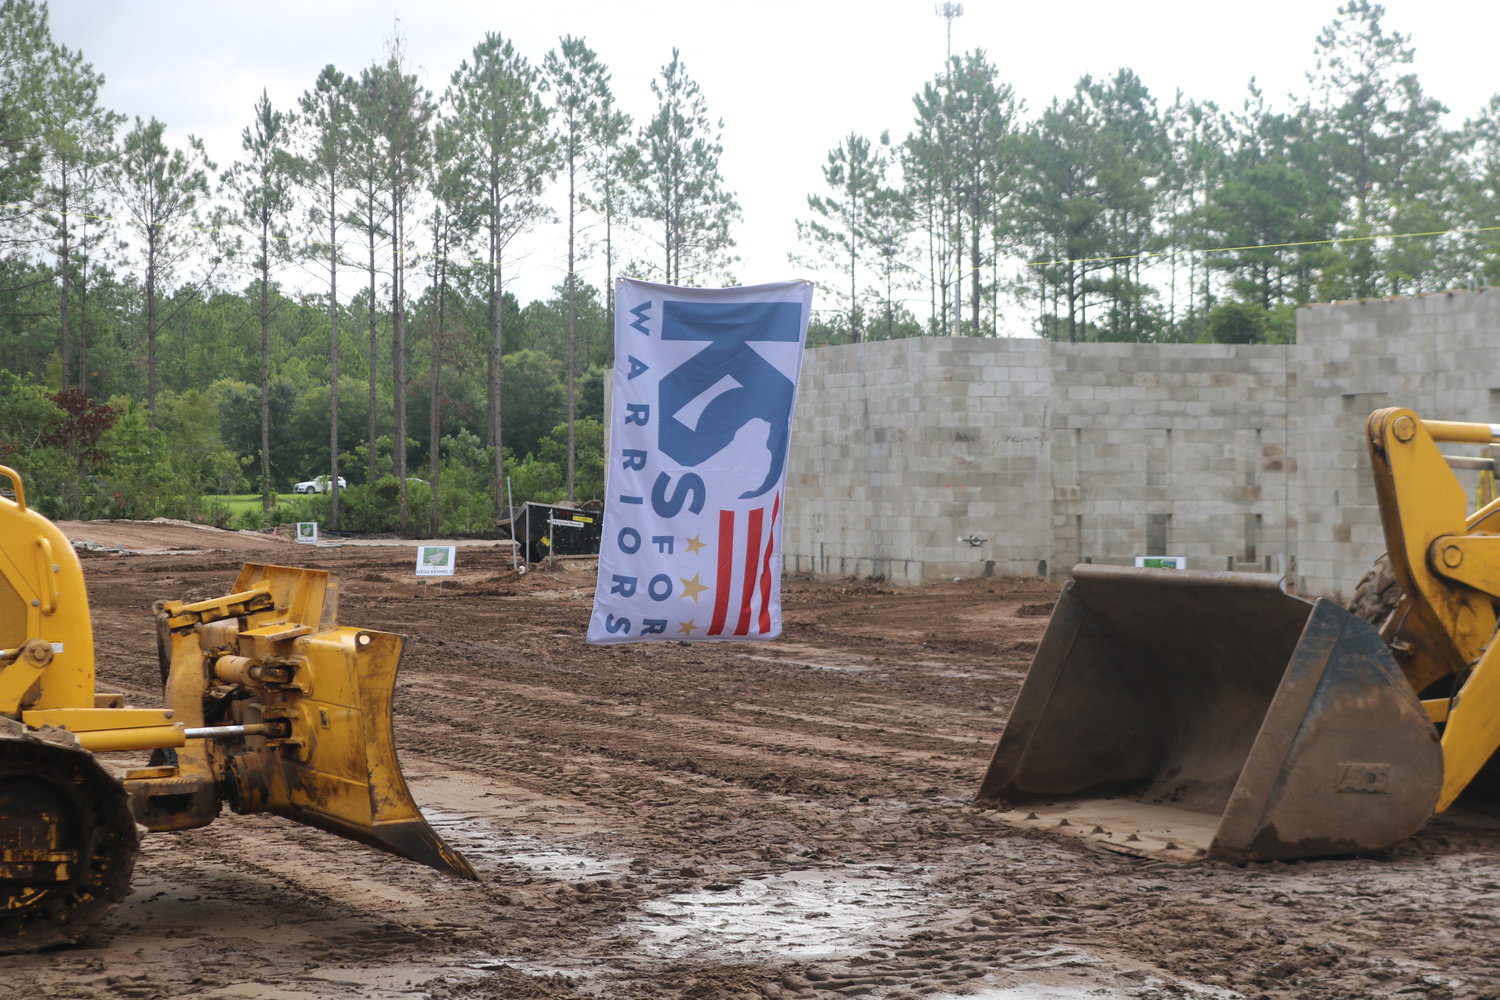 The Campus for K9 Operations is located just South of the U.S. 1 and Race Track Road intersection in Ponte Vedra. It will be the largest facility of its kind in the world once it is completed in March 2023.